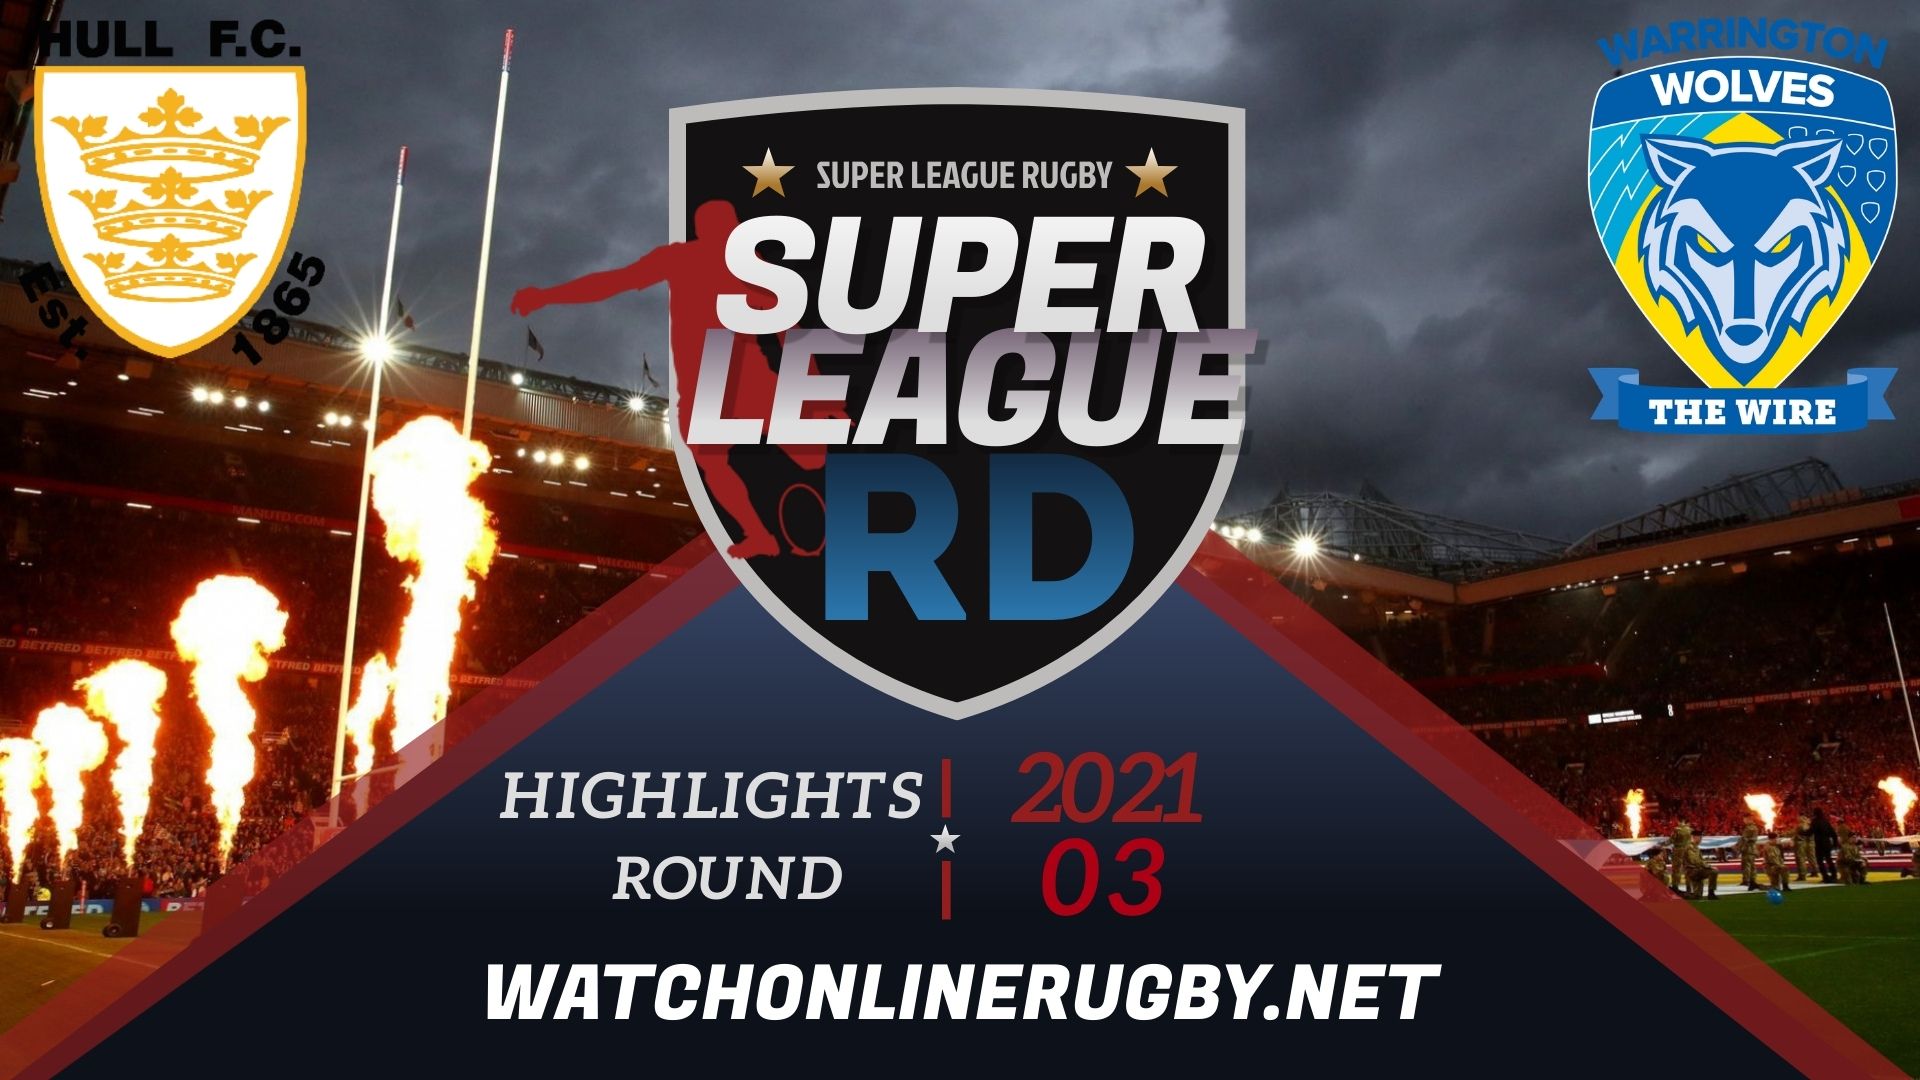 Hull FC Vs Warrington Wolves Super League Rugby 2021 RD 3